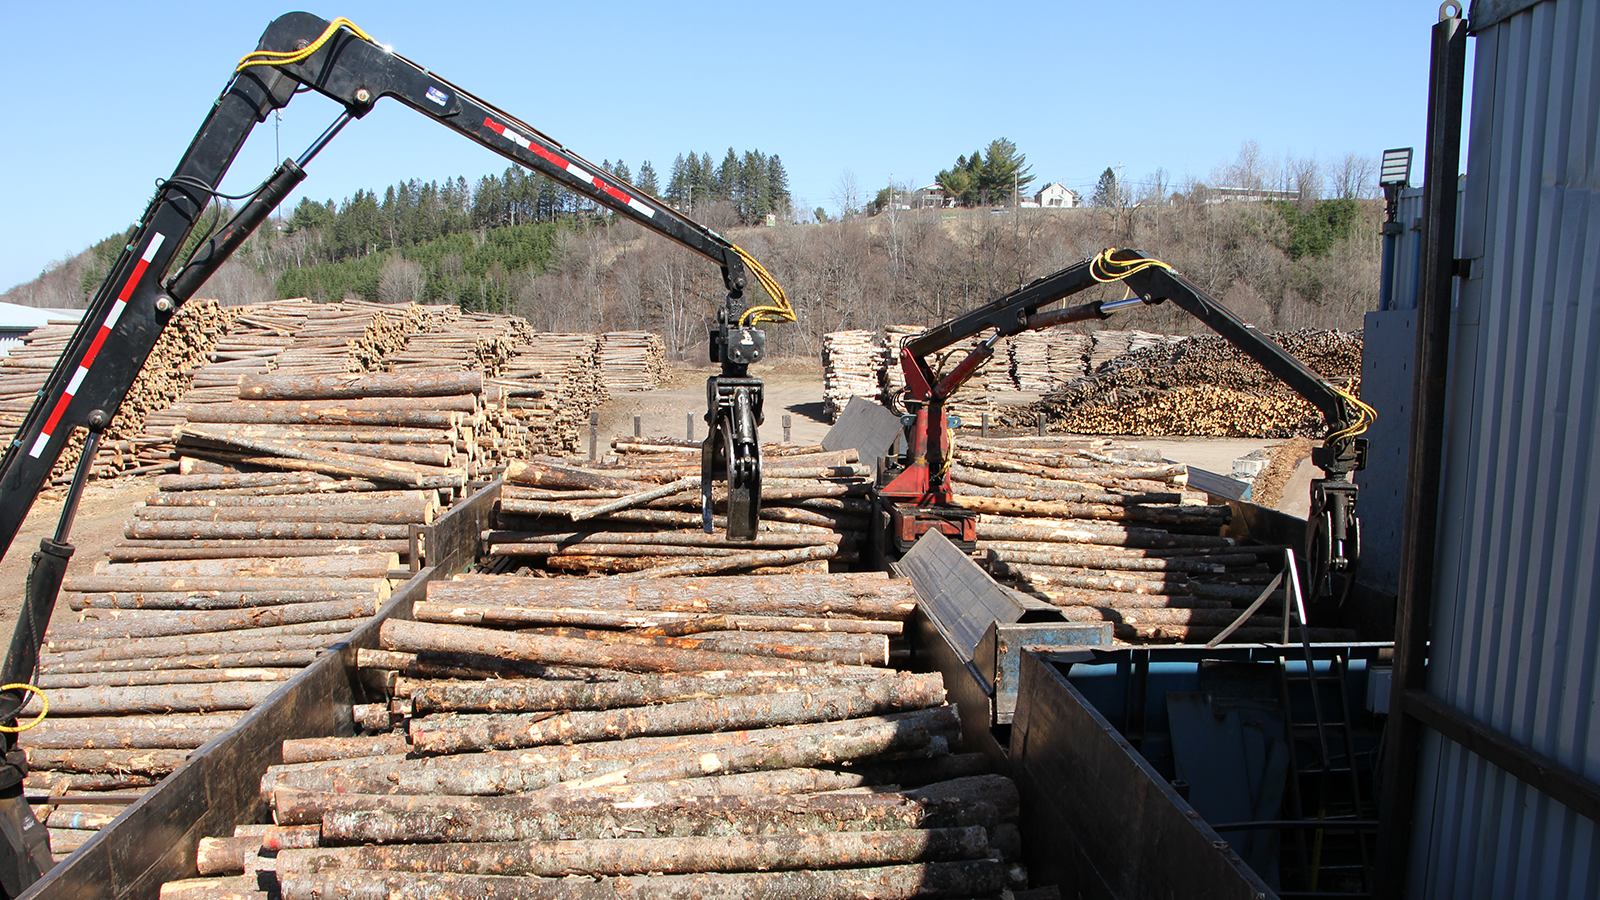 Your log diet constrains sawing